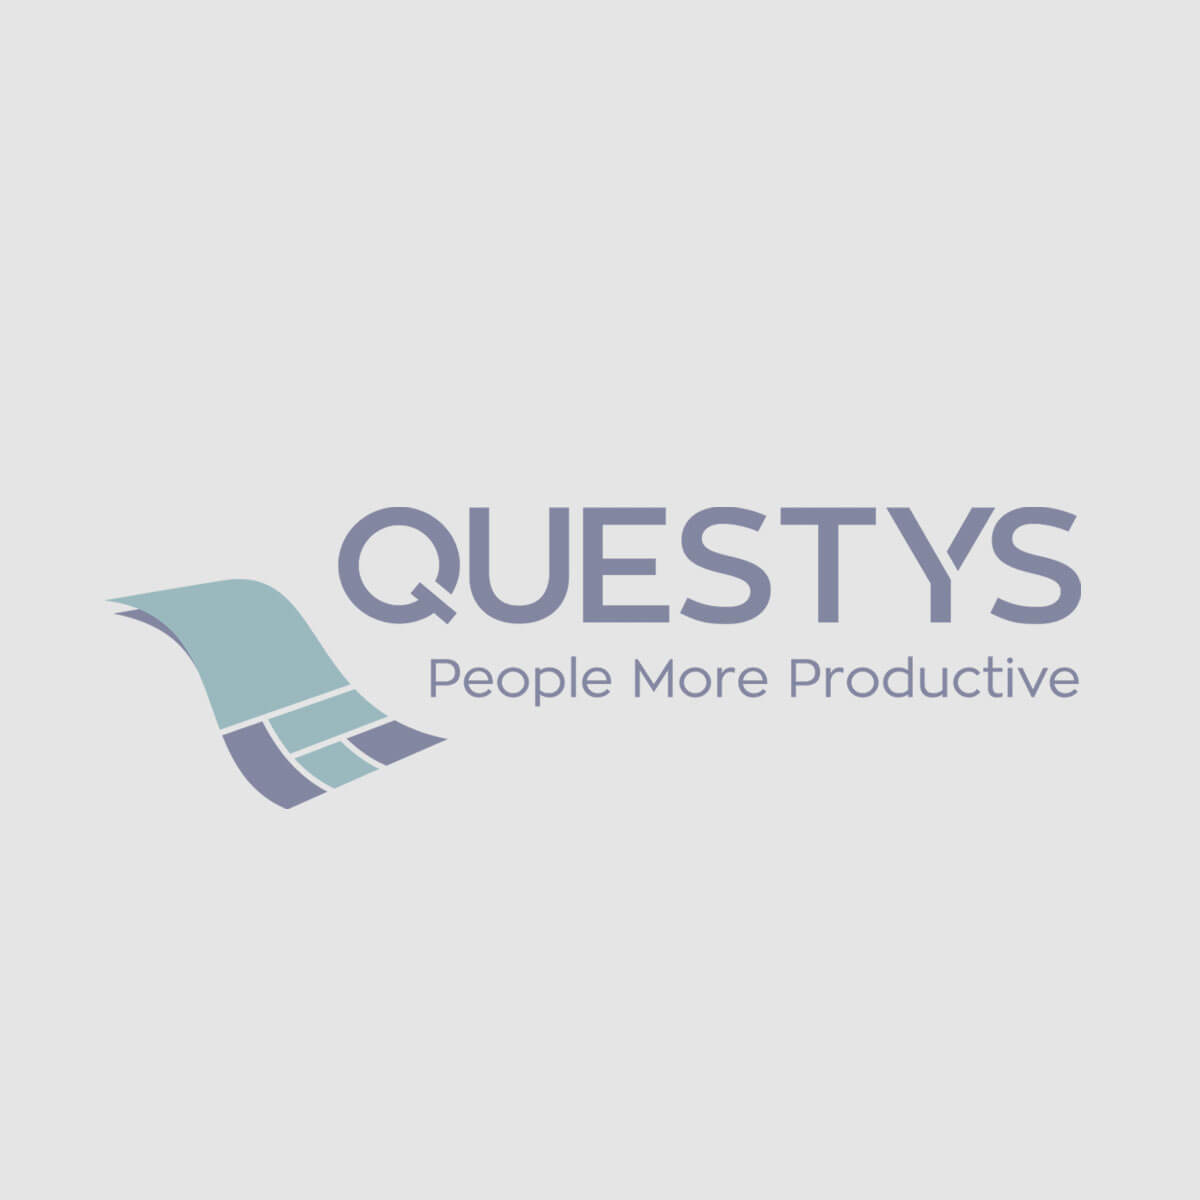 Questys Access Portal: See it in action